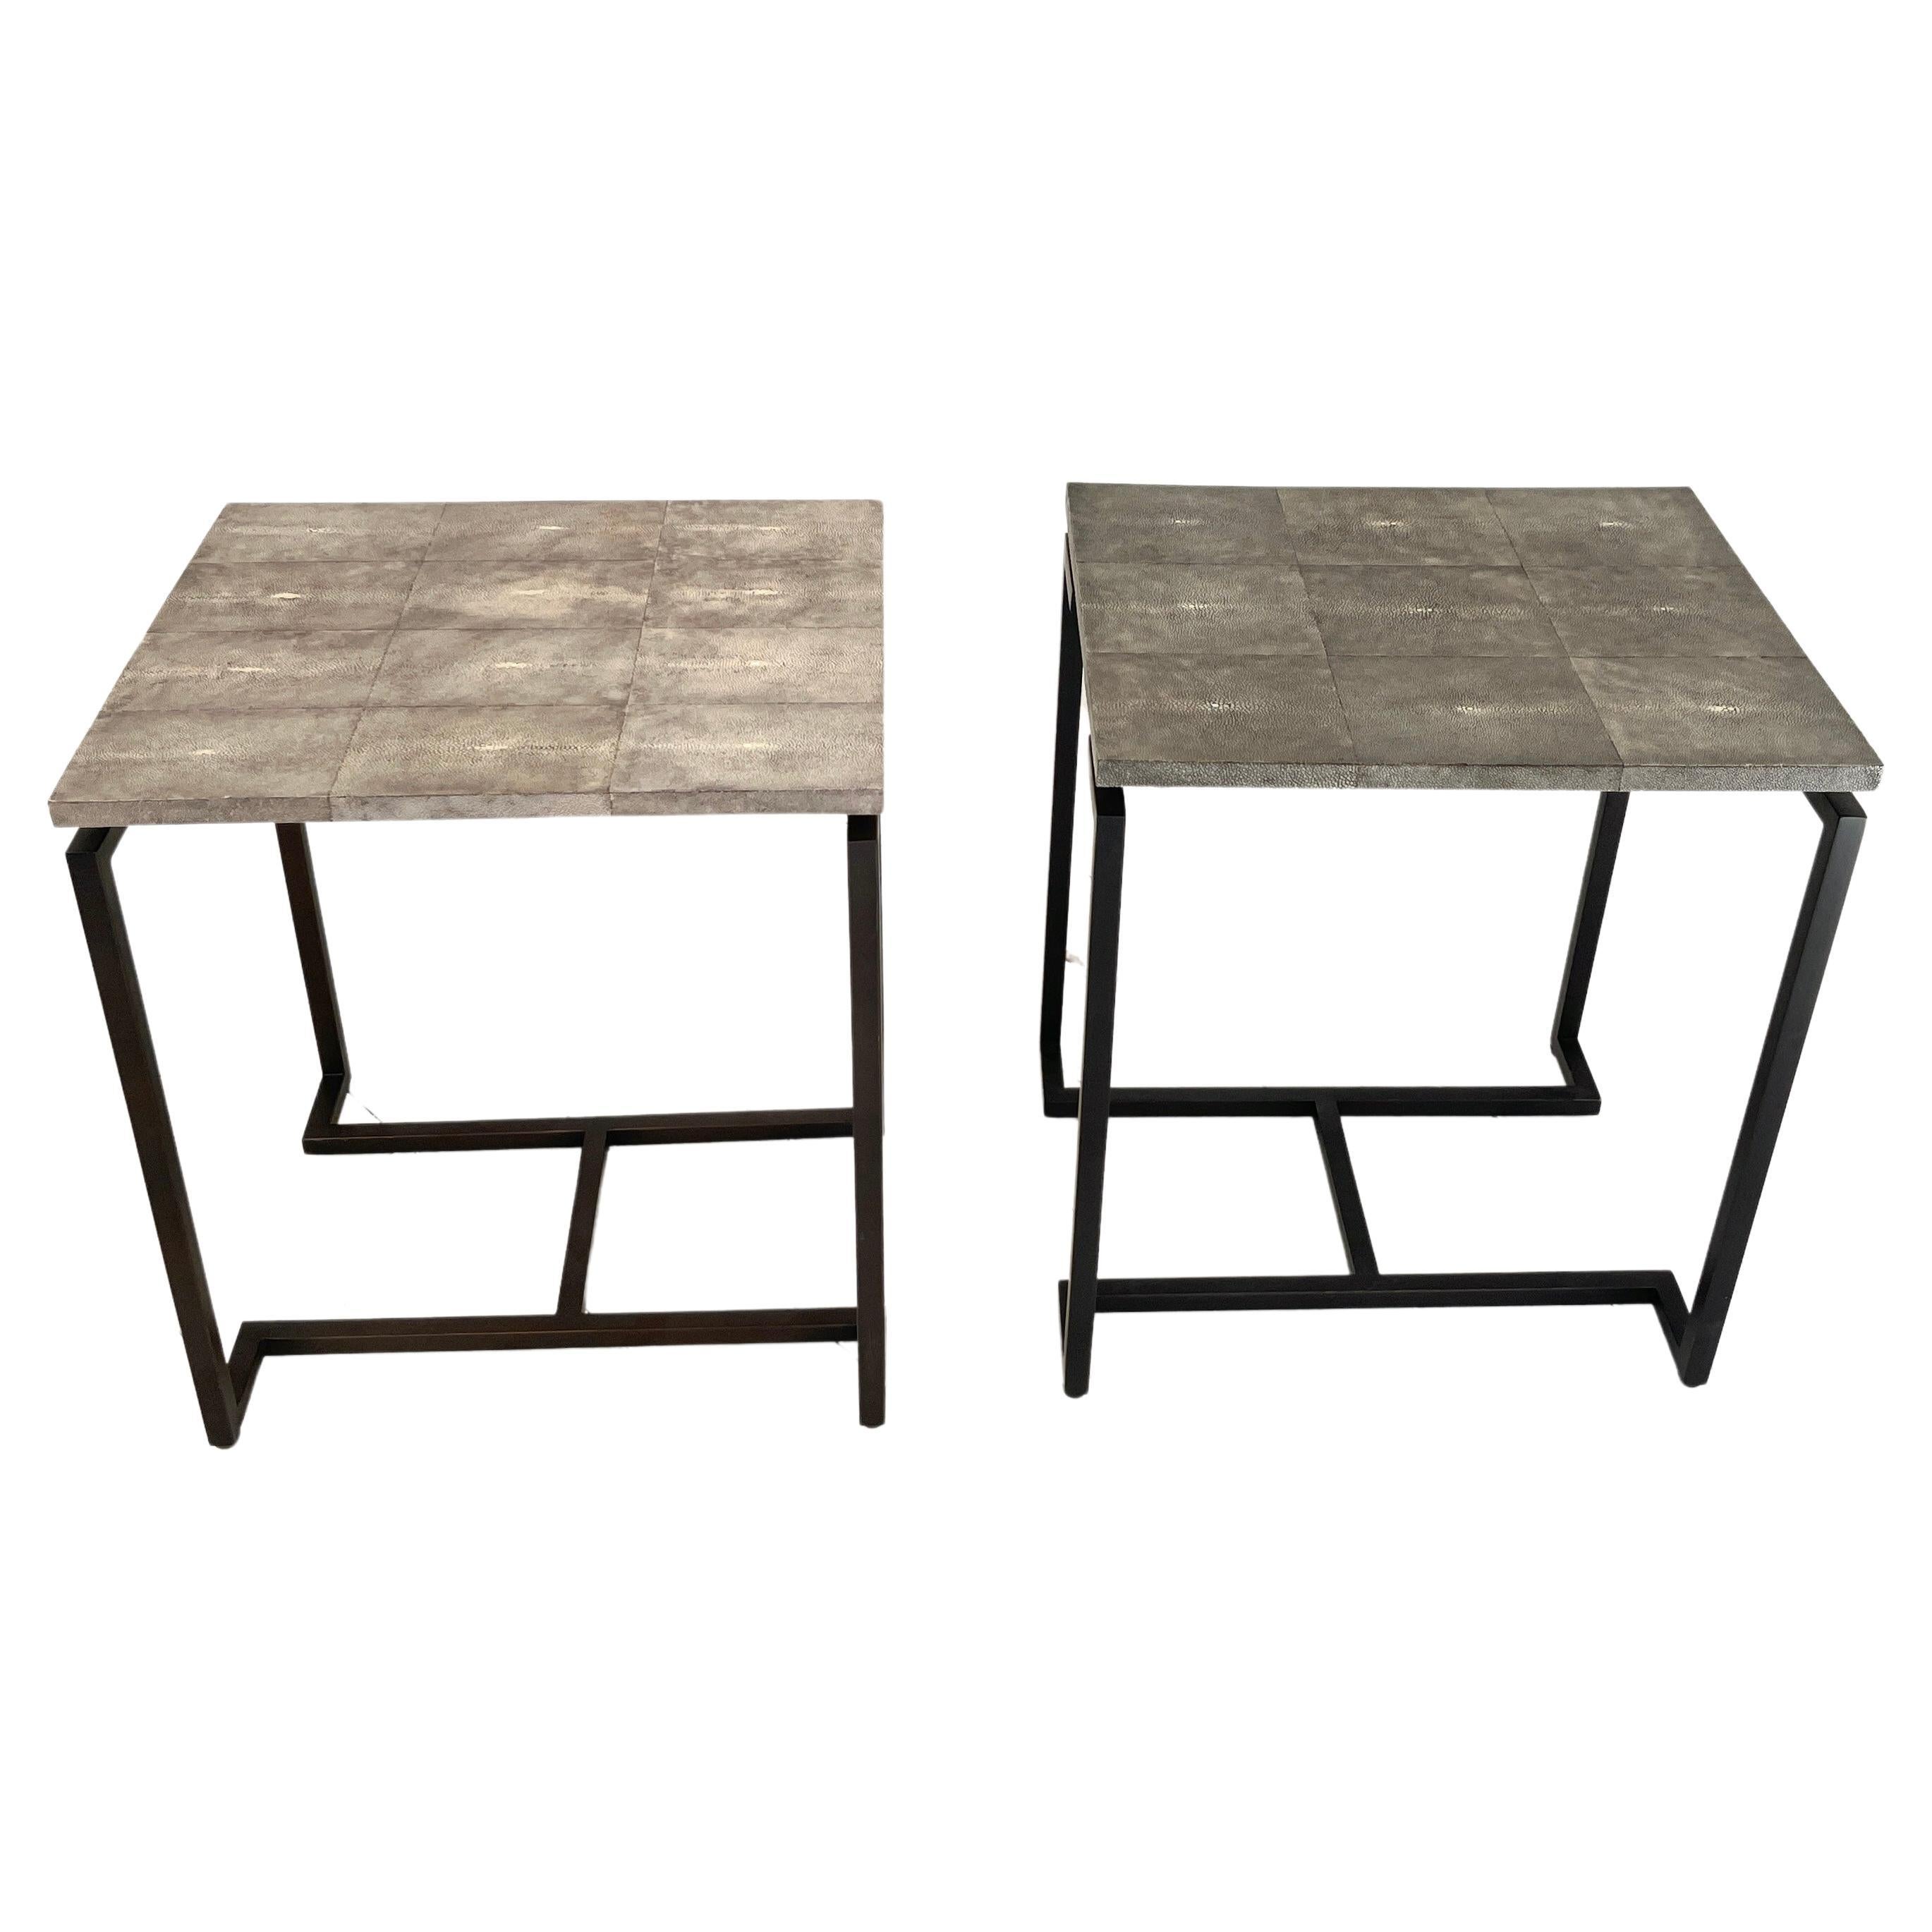 Pair of Side Table in Galuchat